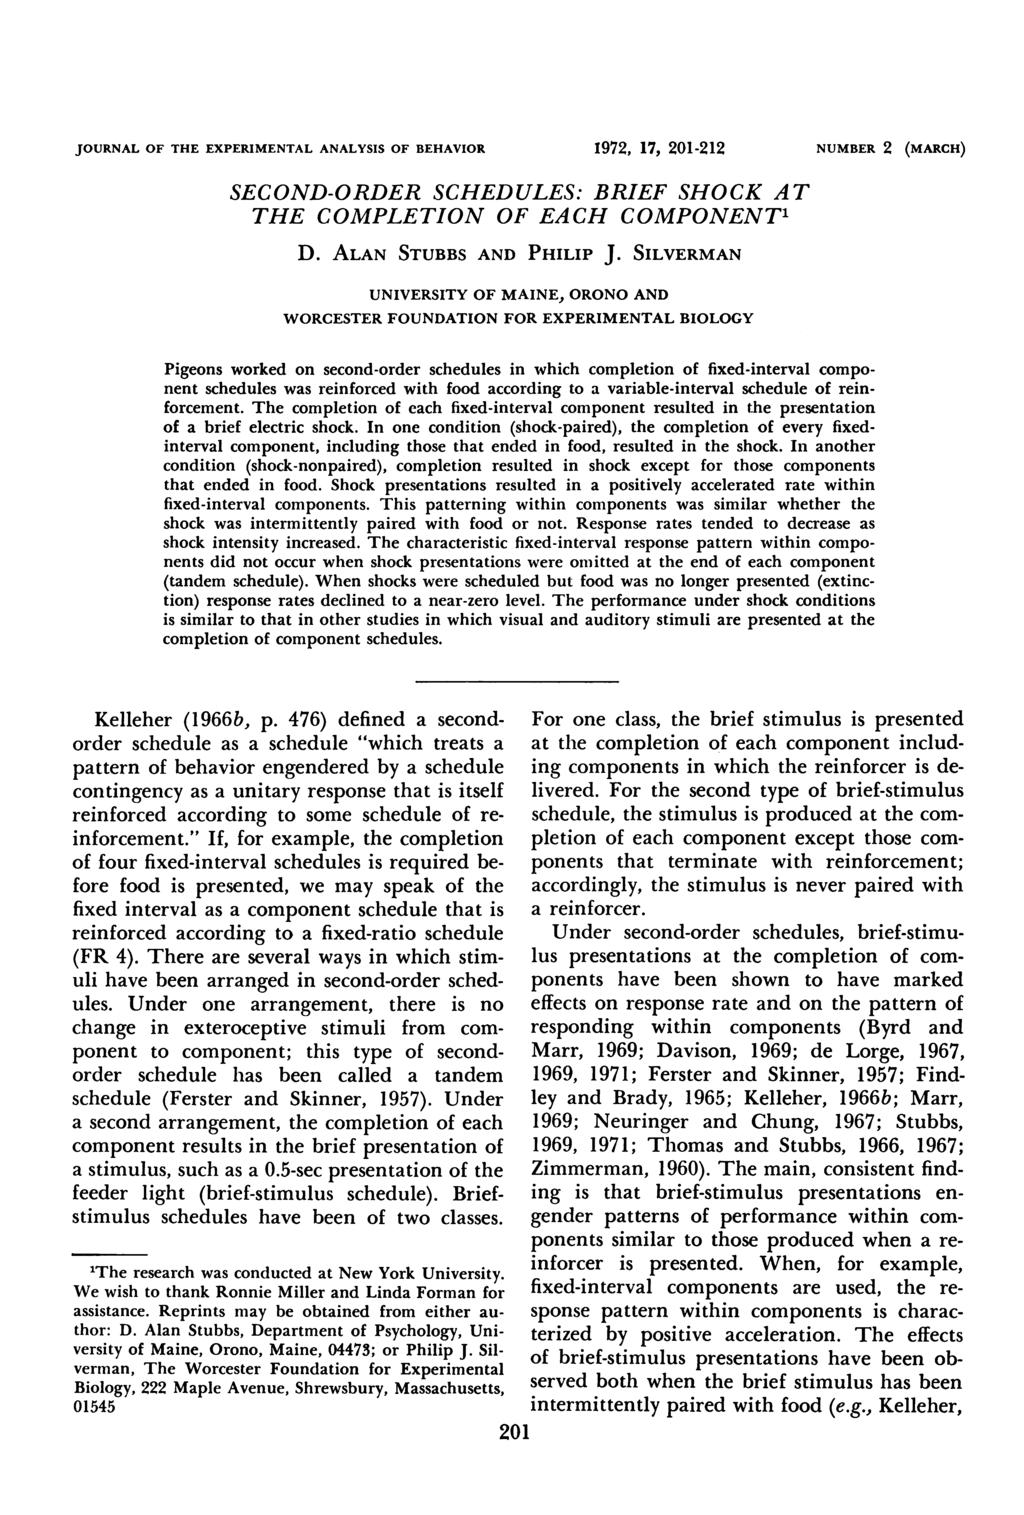 JOURNAL OF THE EXPERIMENTAL ANALYSIS OF BEHAVIOR SECOND-ORDER SCHEDULES: BRIEF SHOCK AT THE COMPLETION OF EACH COMPONENT' D. ALAN STUBBS AND PHILIP J.